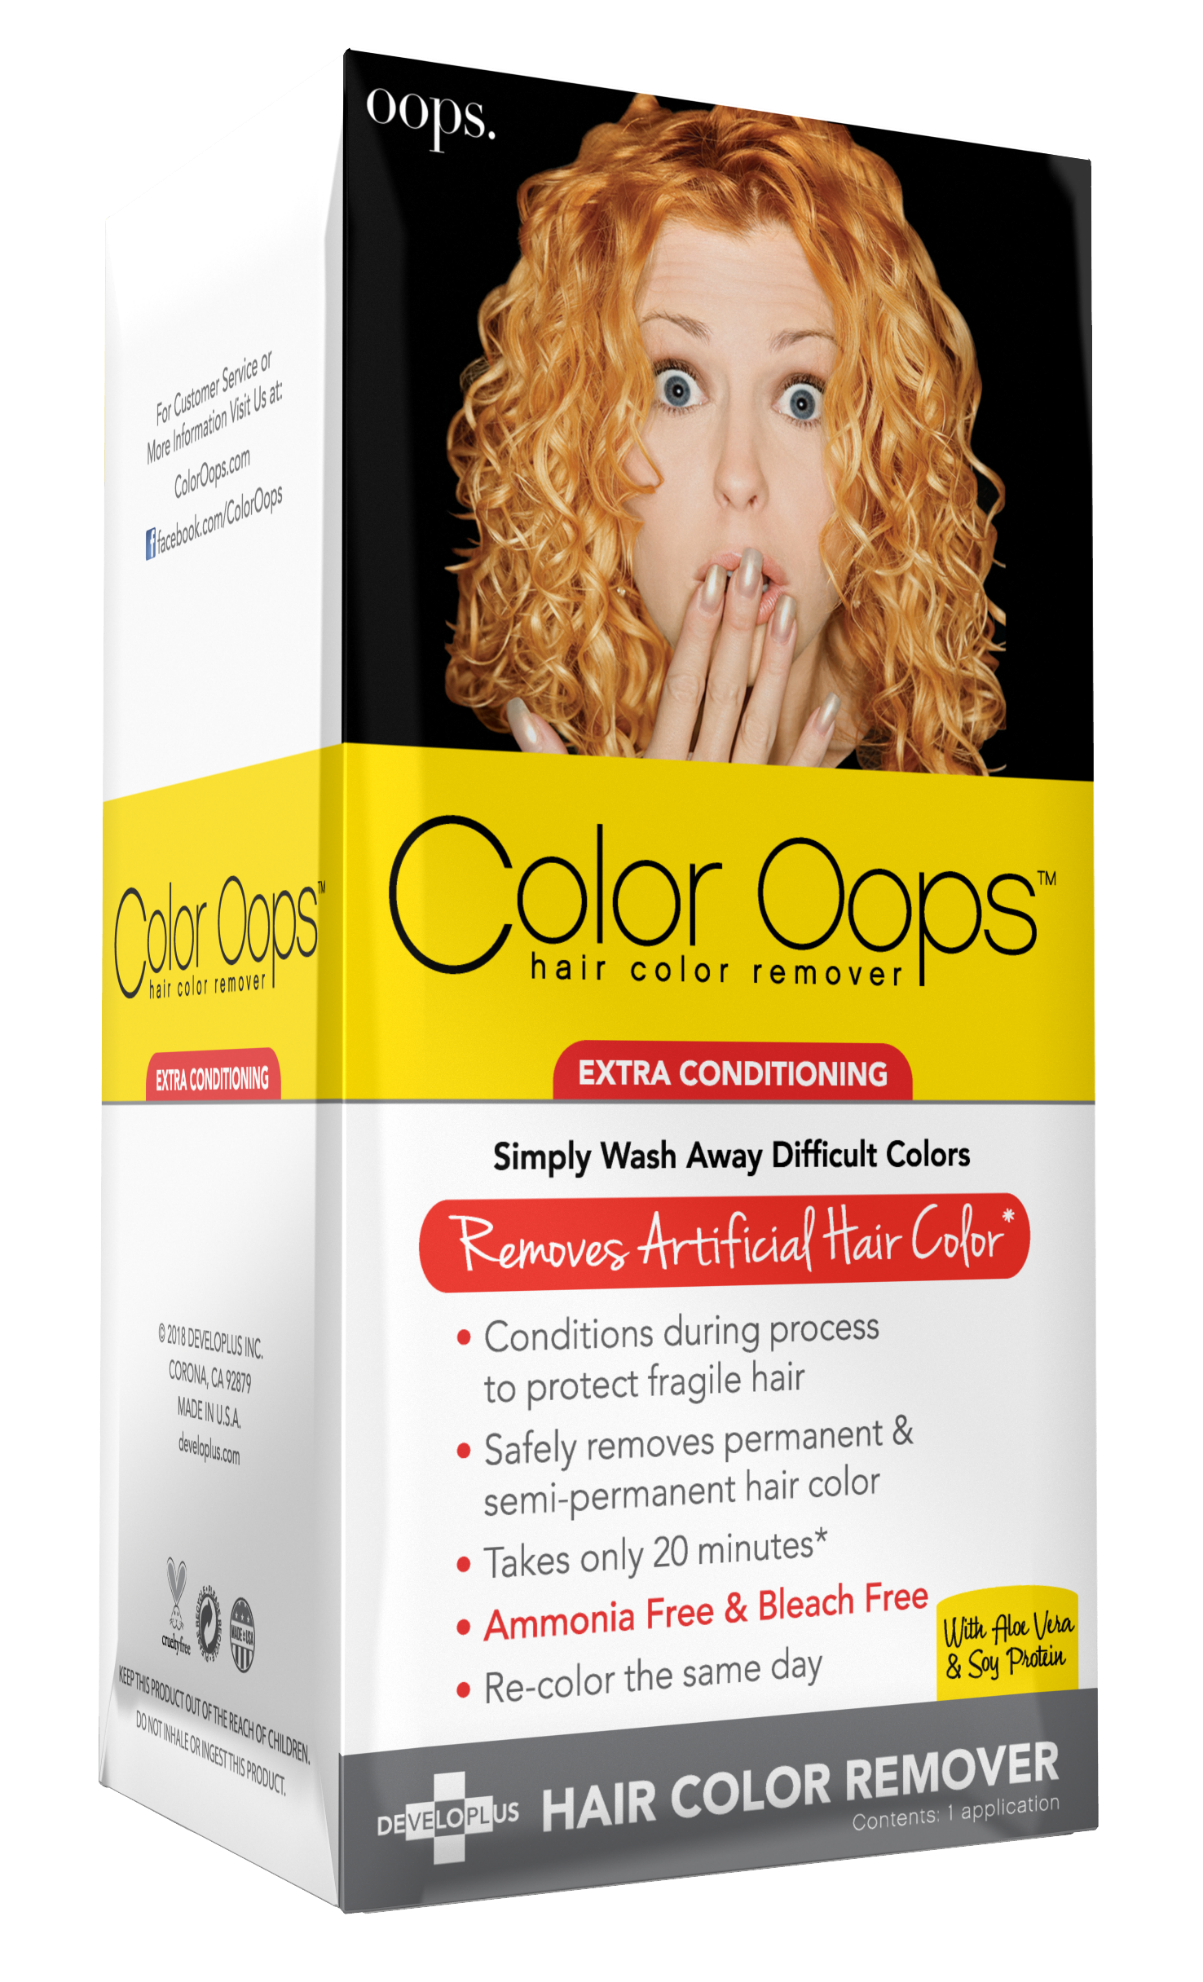 Developlus Color Oops Hair Color Remover Wipes 10'S (2